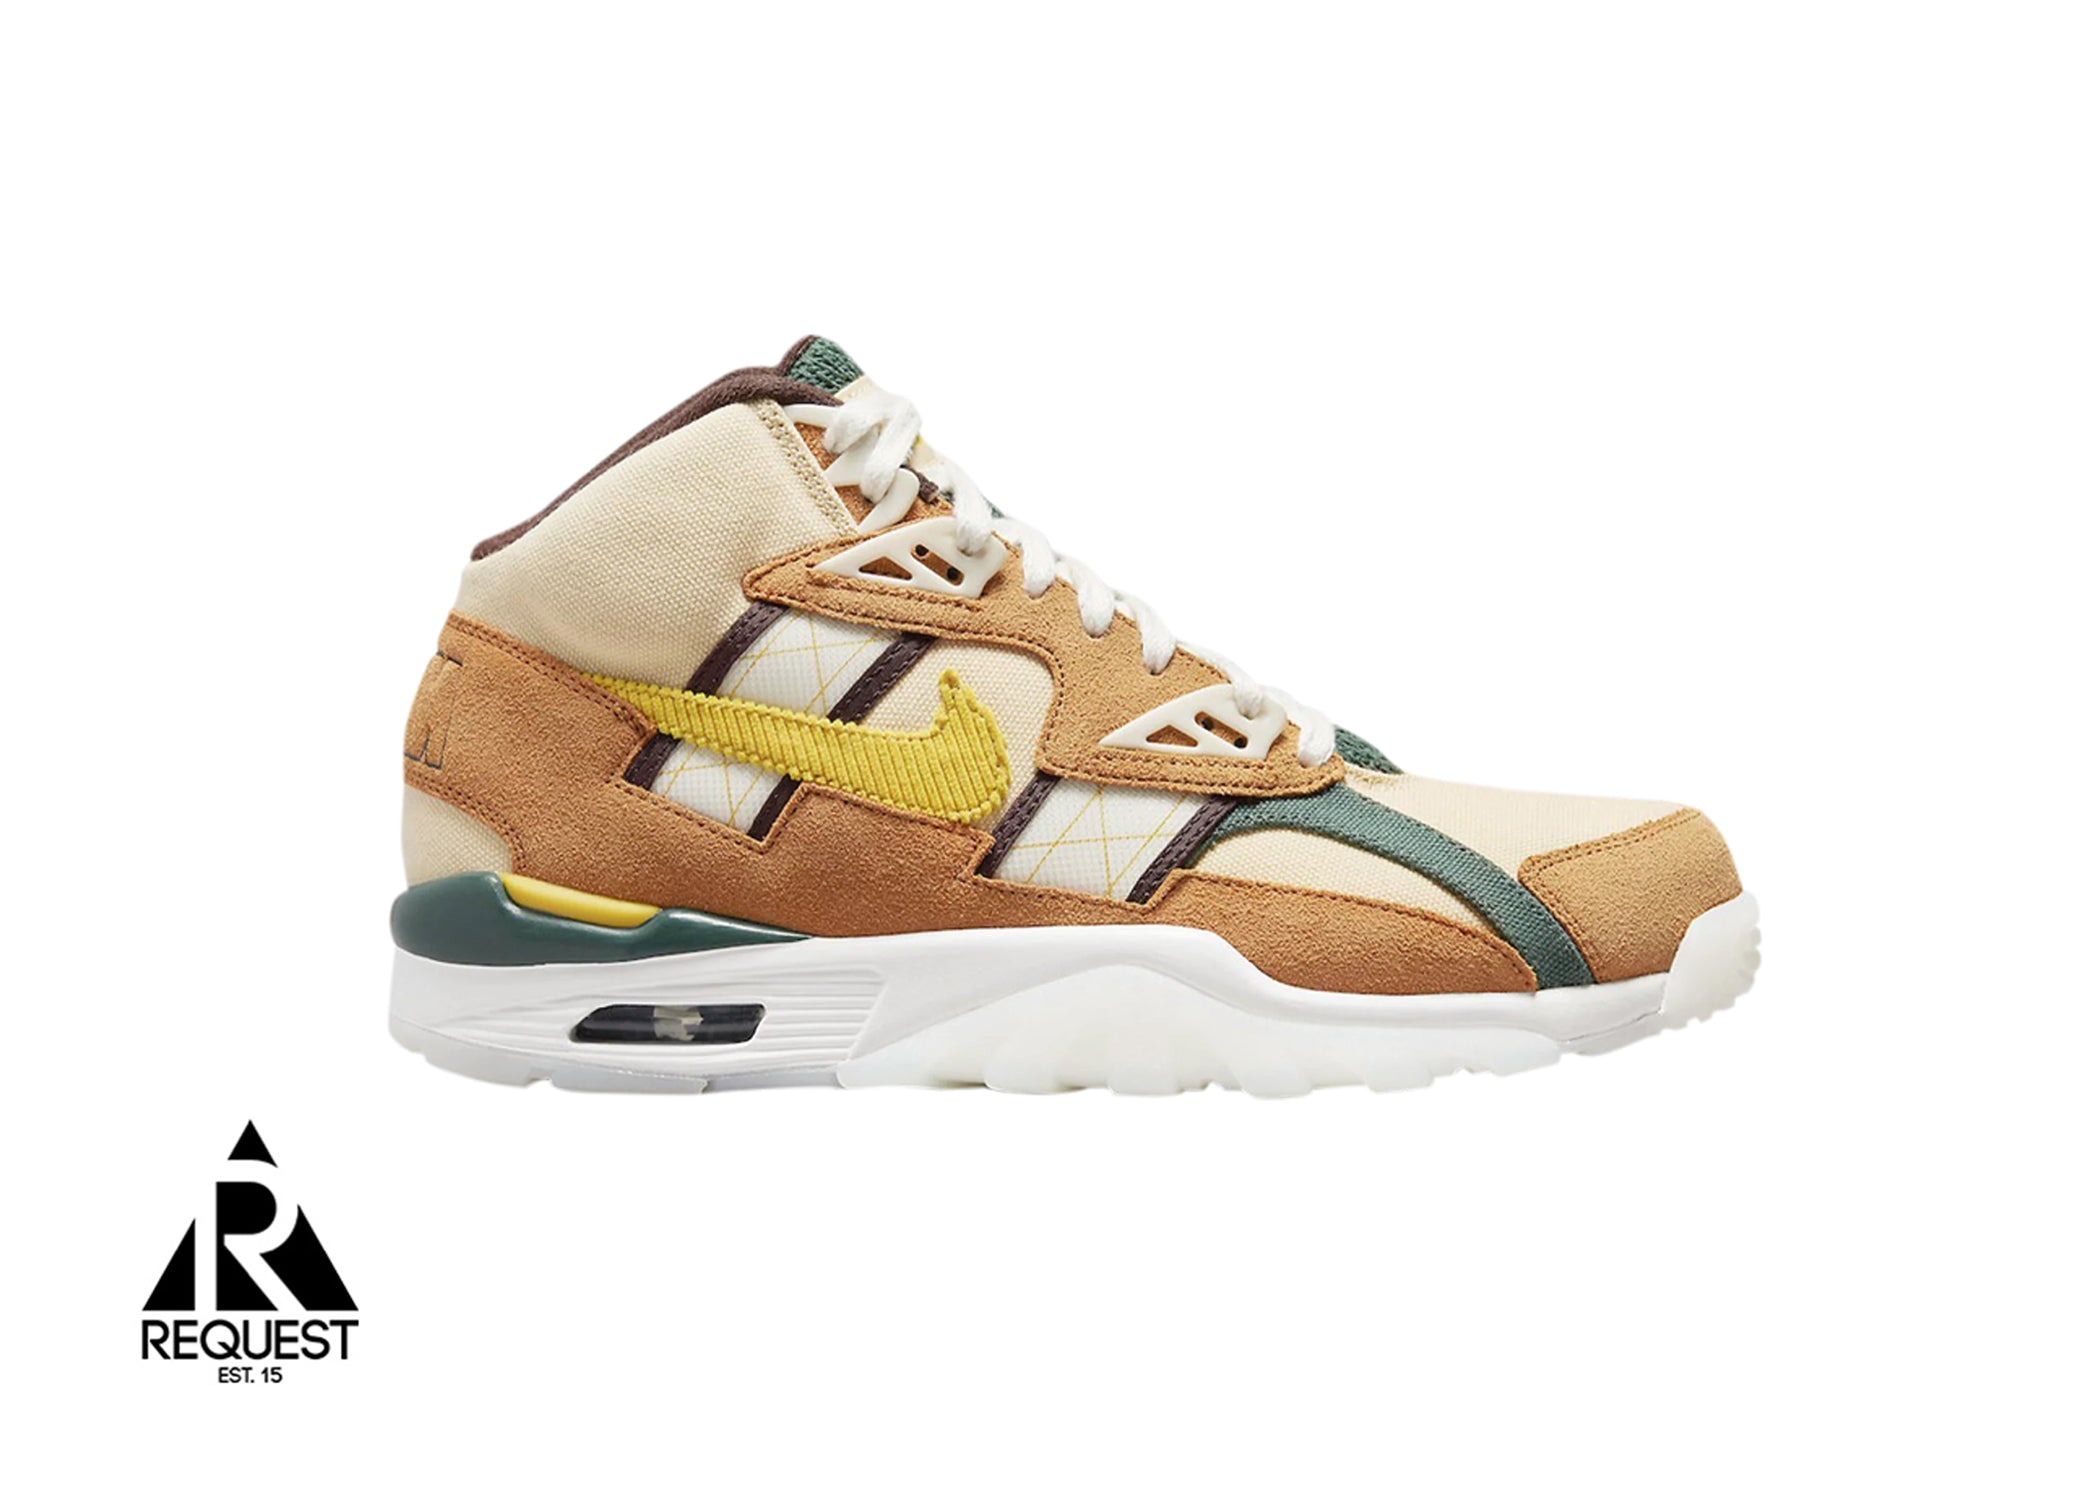 Nike Air Trainer SC High “Outdoor”